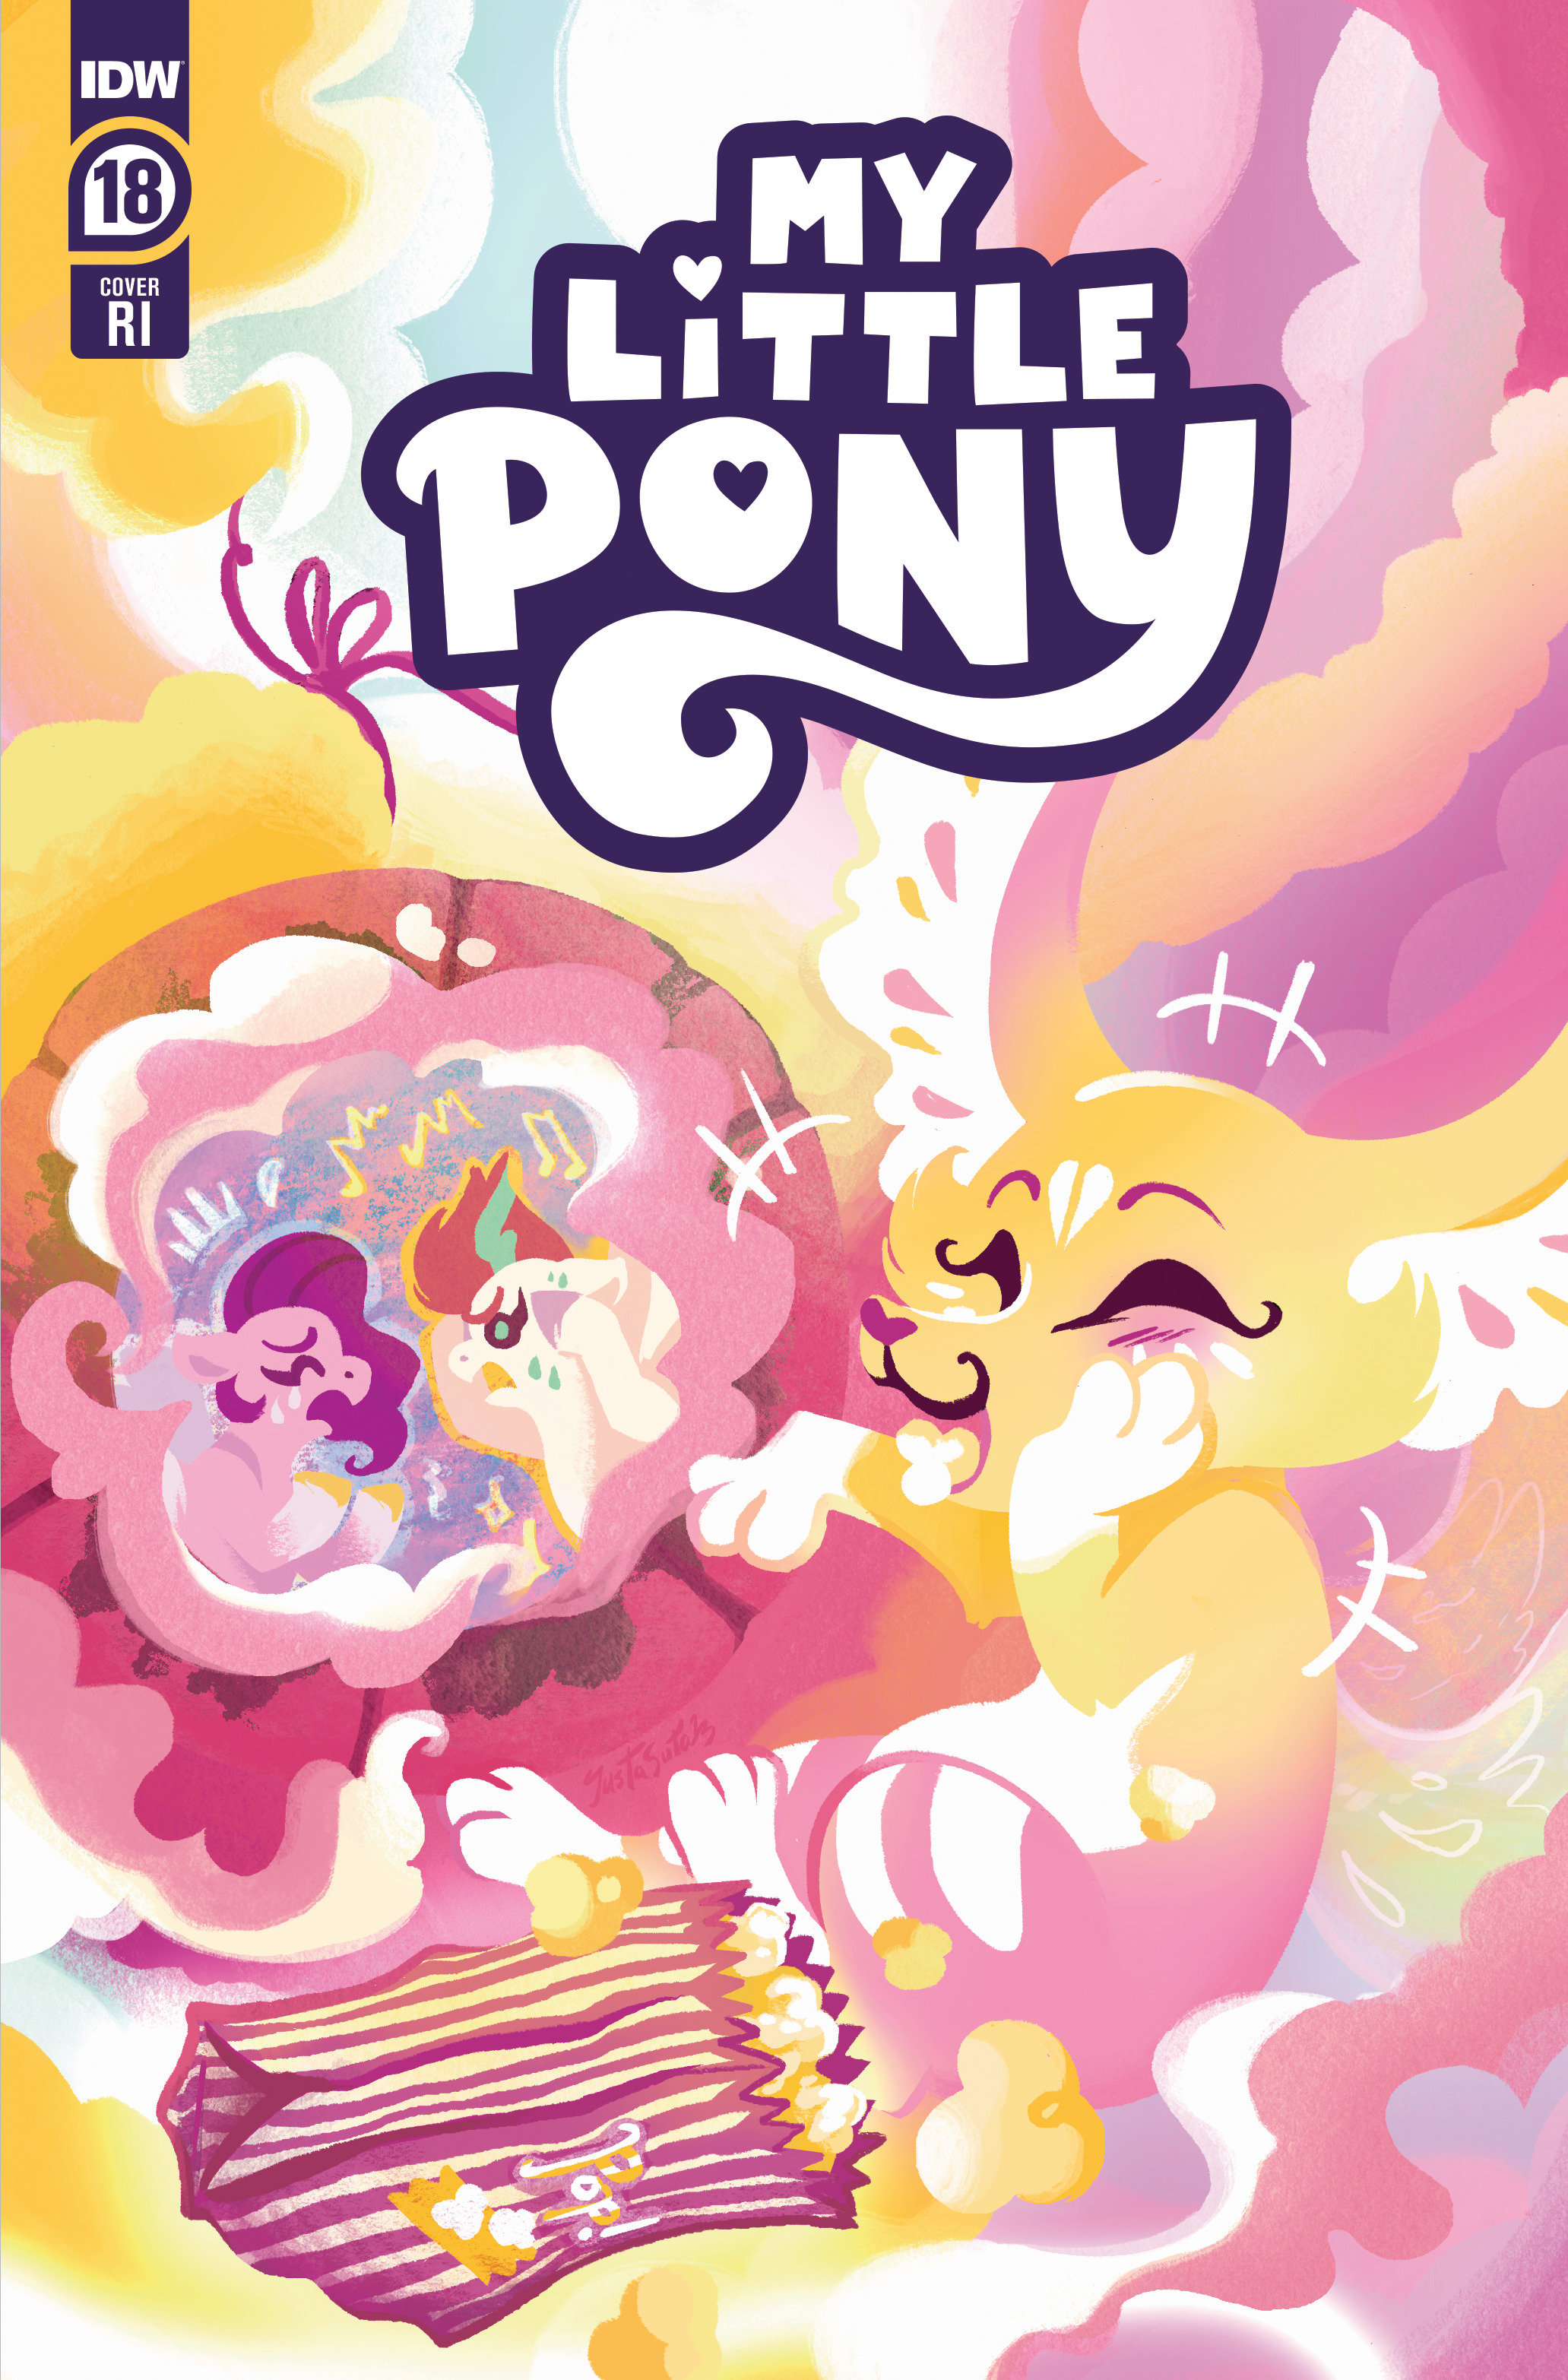 My Little Pony #18 Cover Justasuta 1 for 10 Incentive